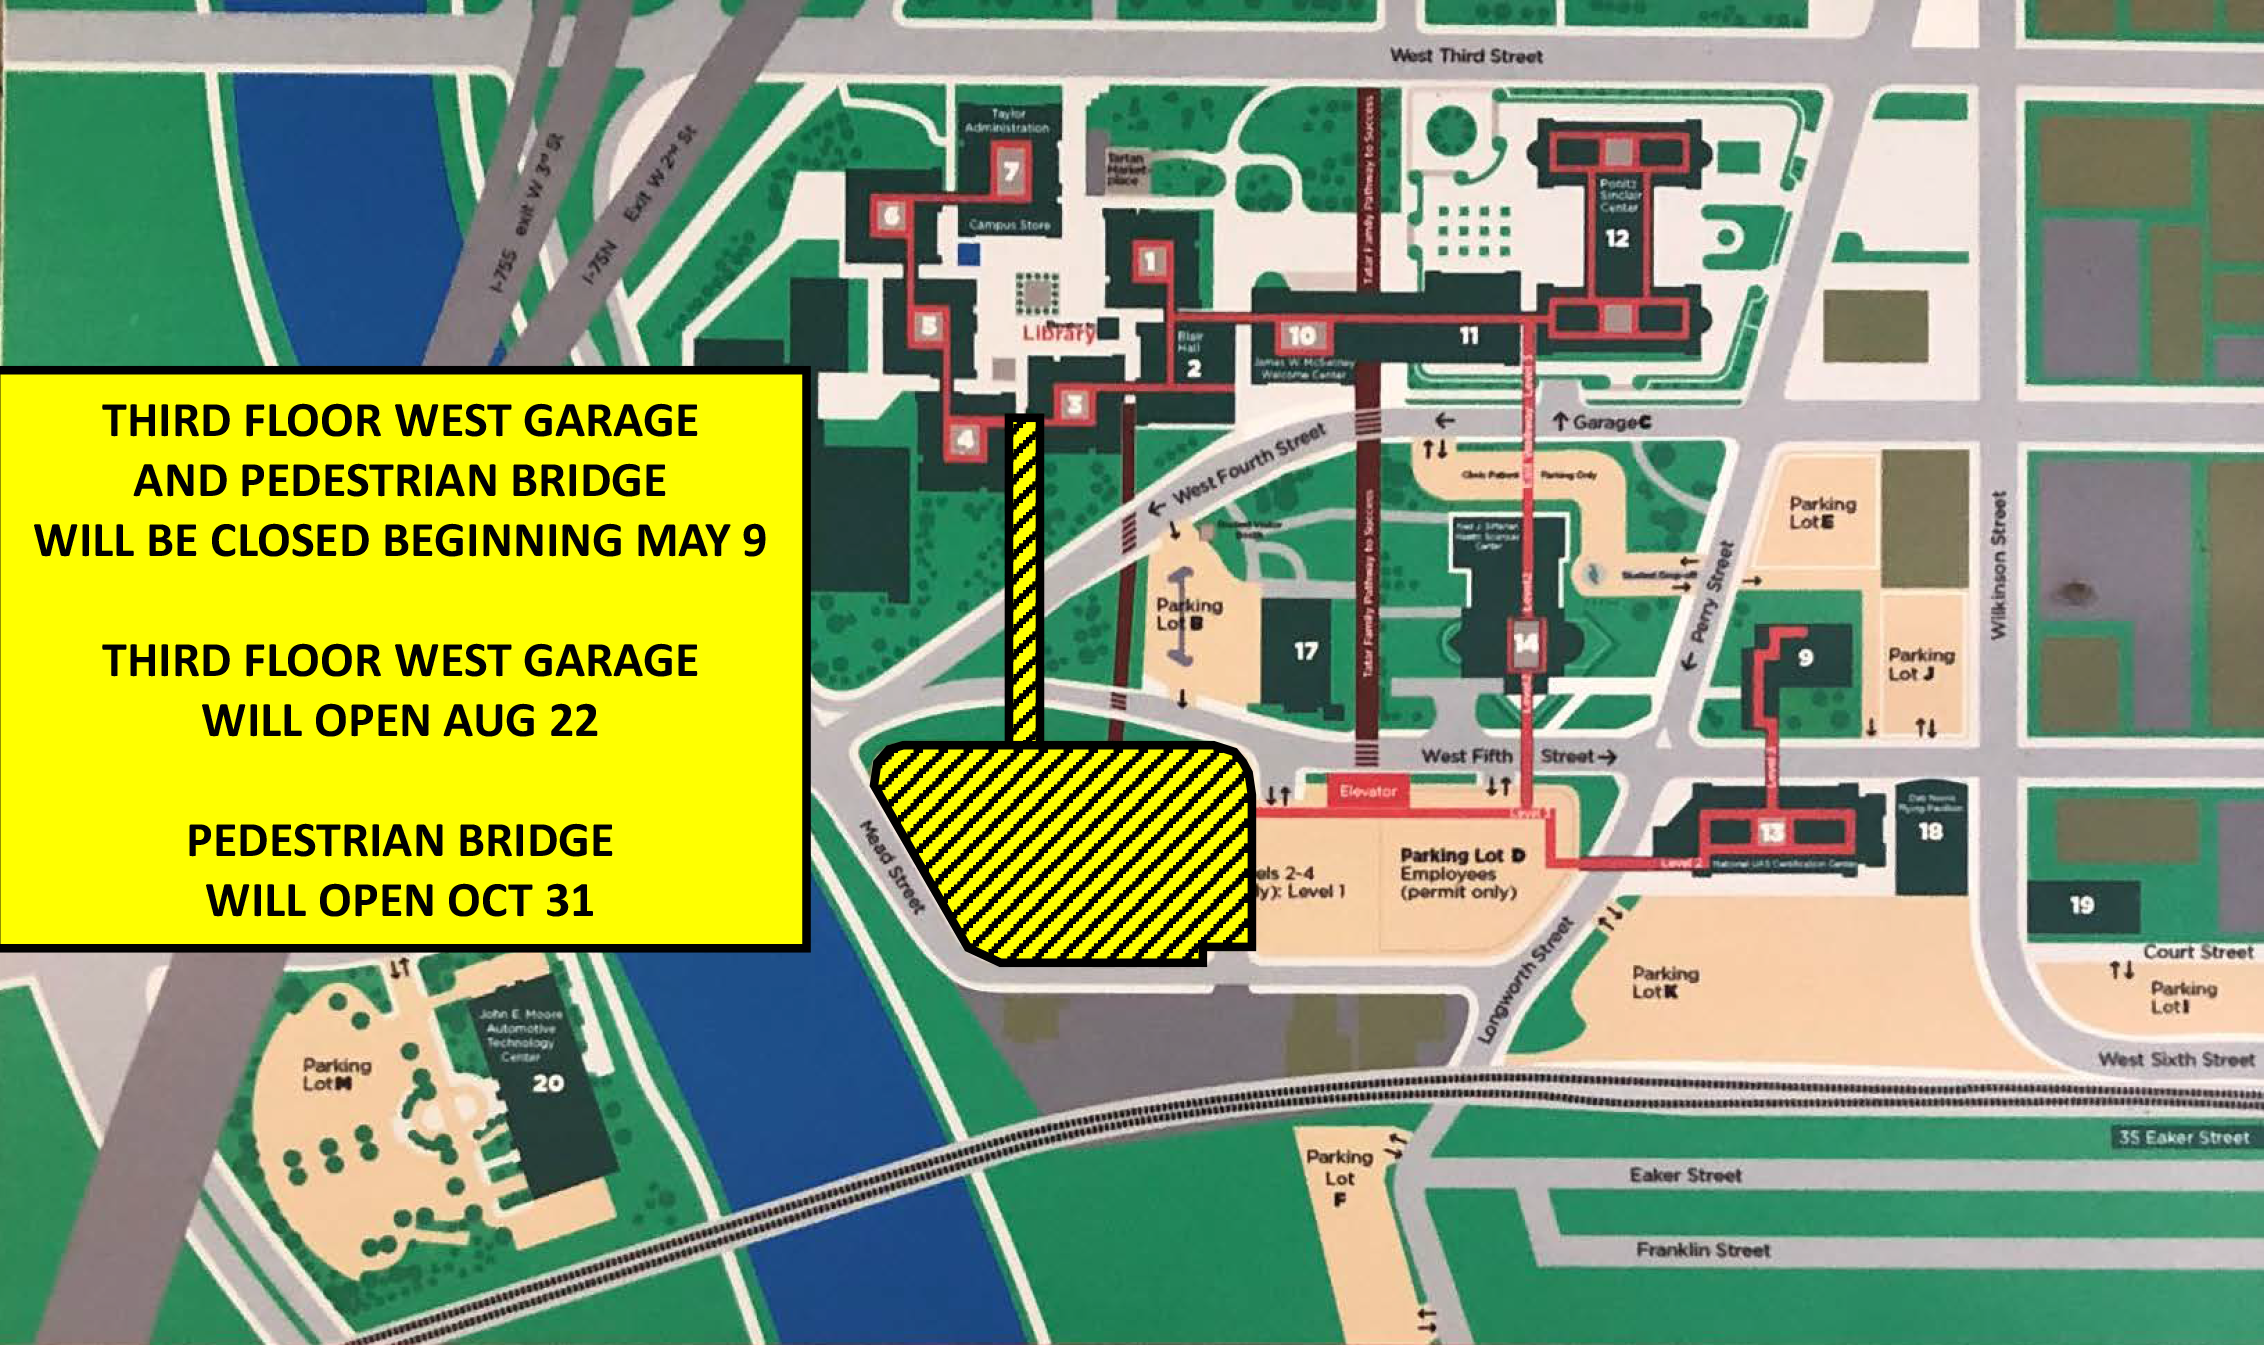 Student Parking Lots Map: Student and Visitor Parking Areas are Lot B, E, J A, K, I, M, and F. Road and Building Construction Areas are on West 4th Street, West 5th Street, Building 10, and the plaza outside area by the Library. Follow Green Arrows to Student Garage A Rear Entrance to avoid the 4th and 5th street construction one lane roads.